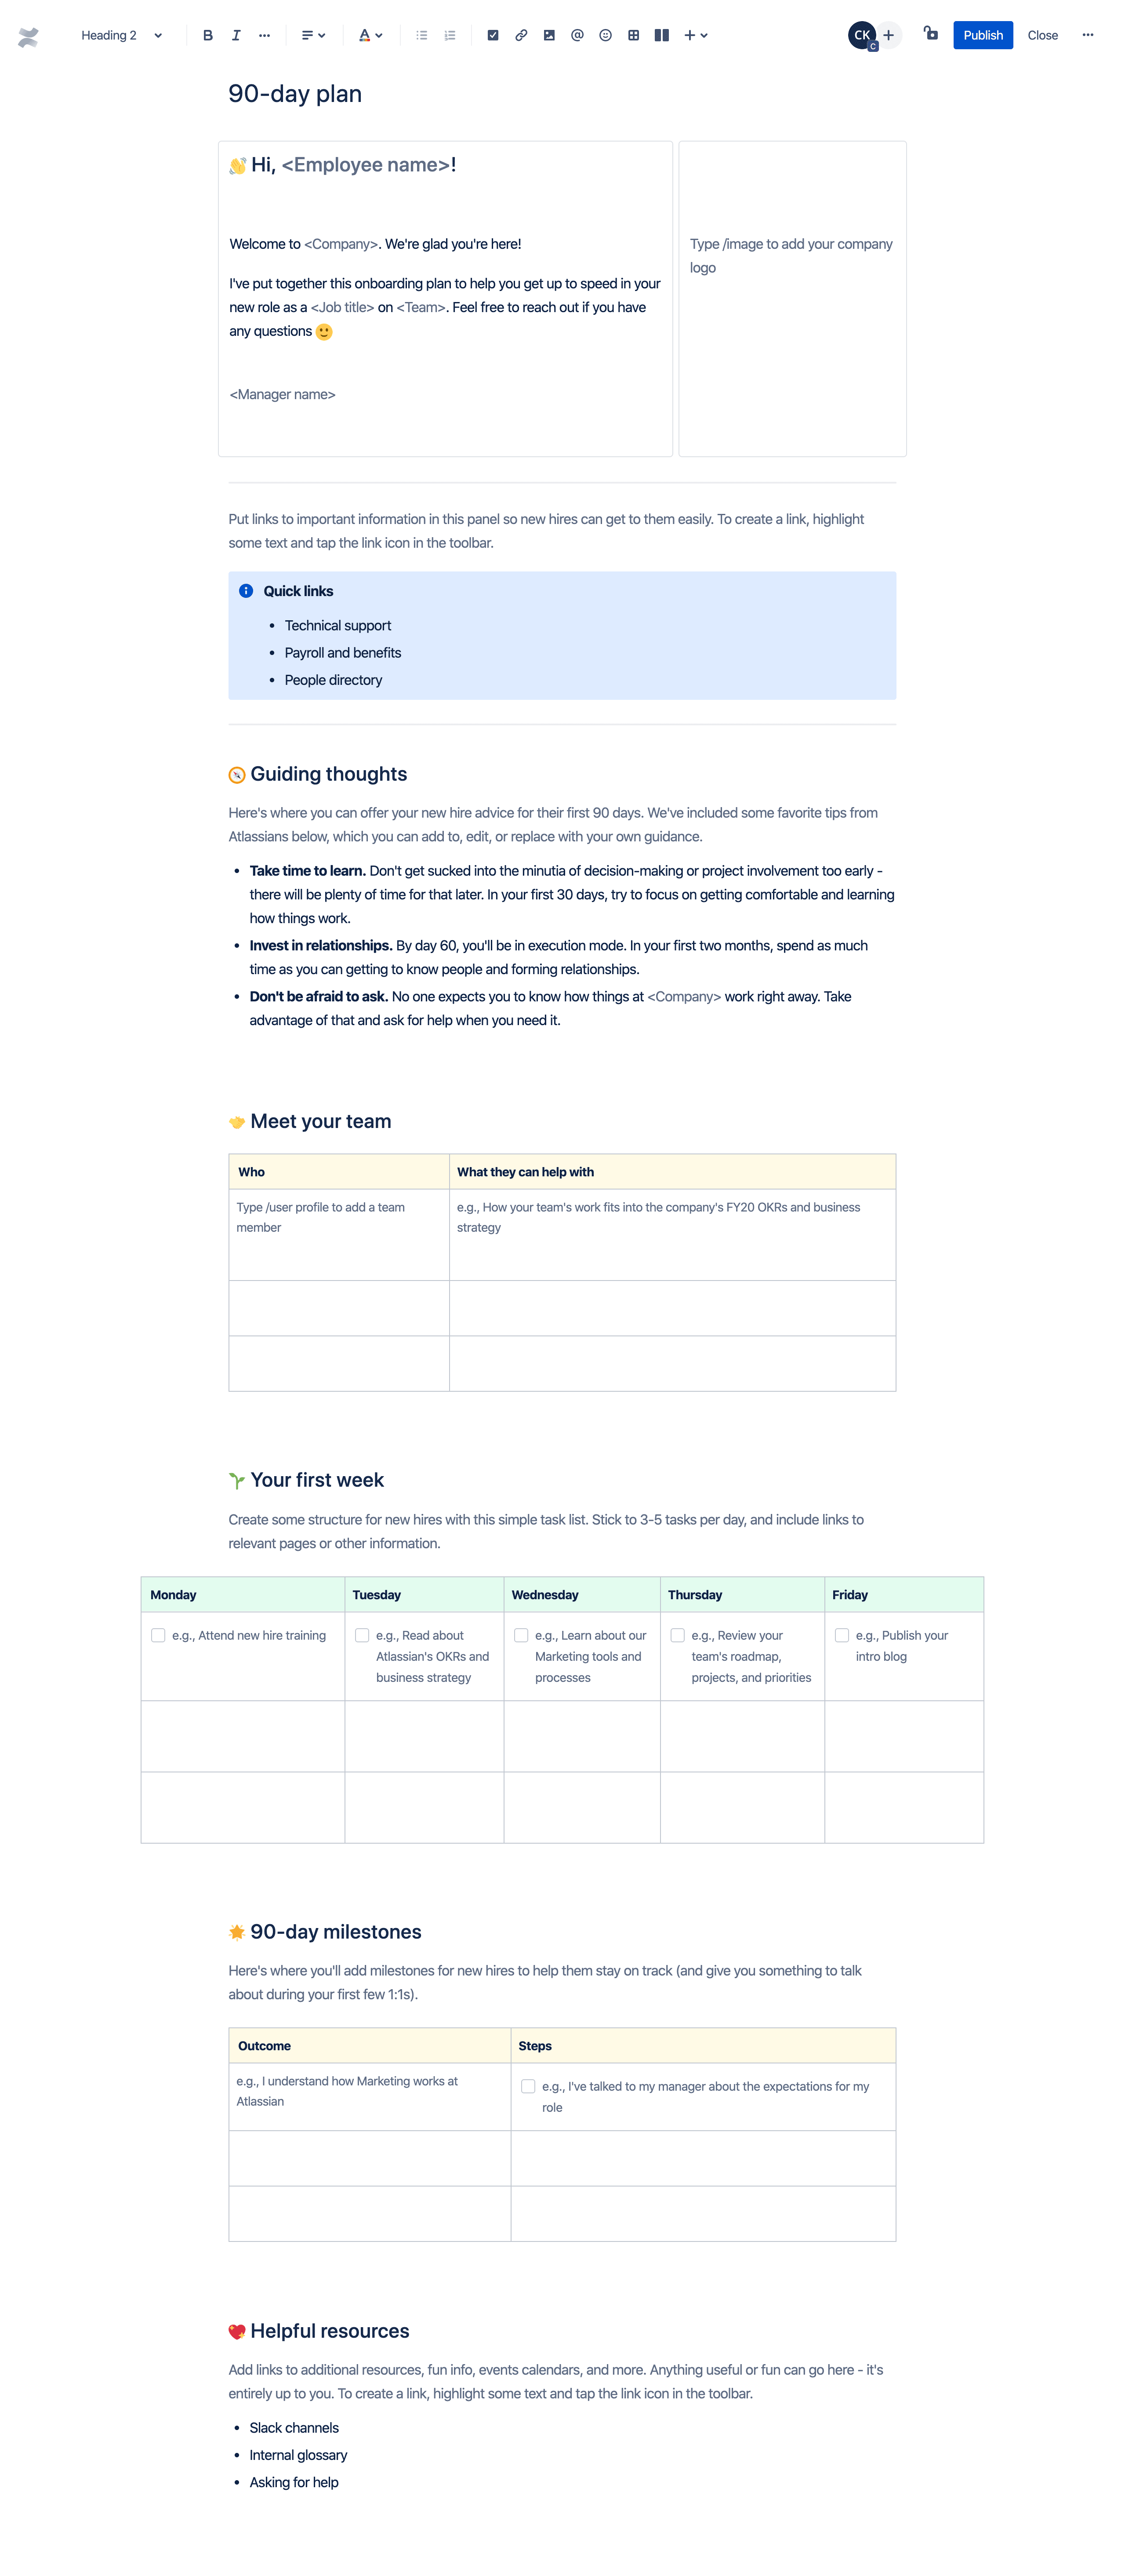 90-day plan template